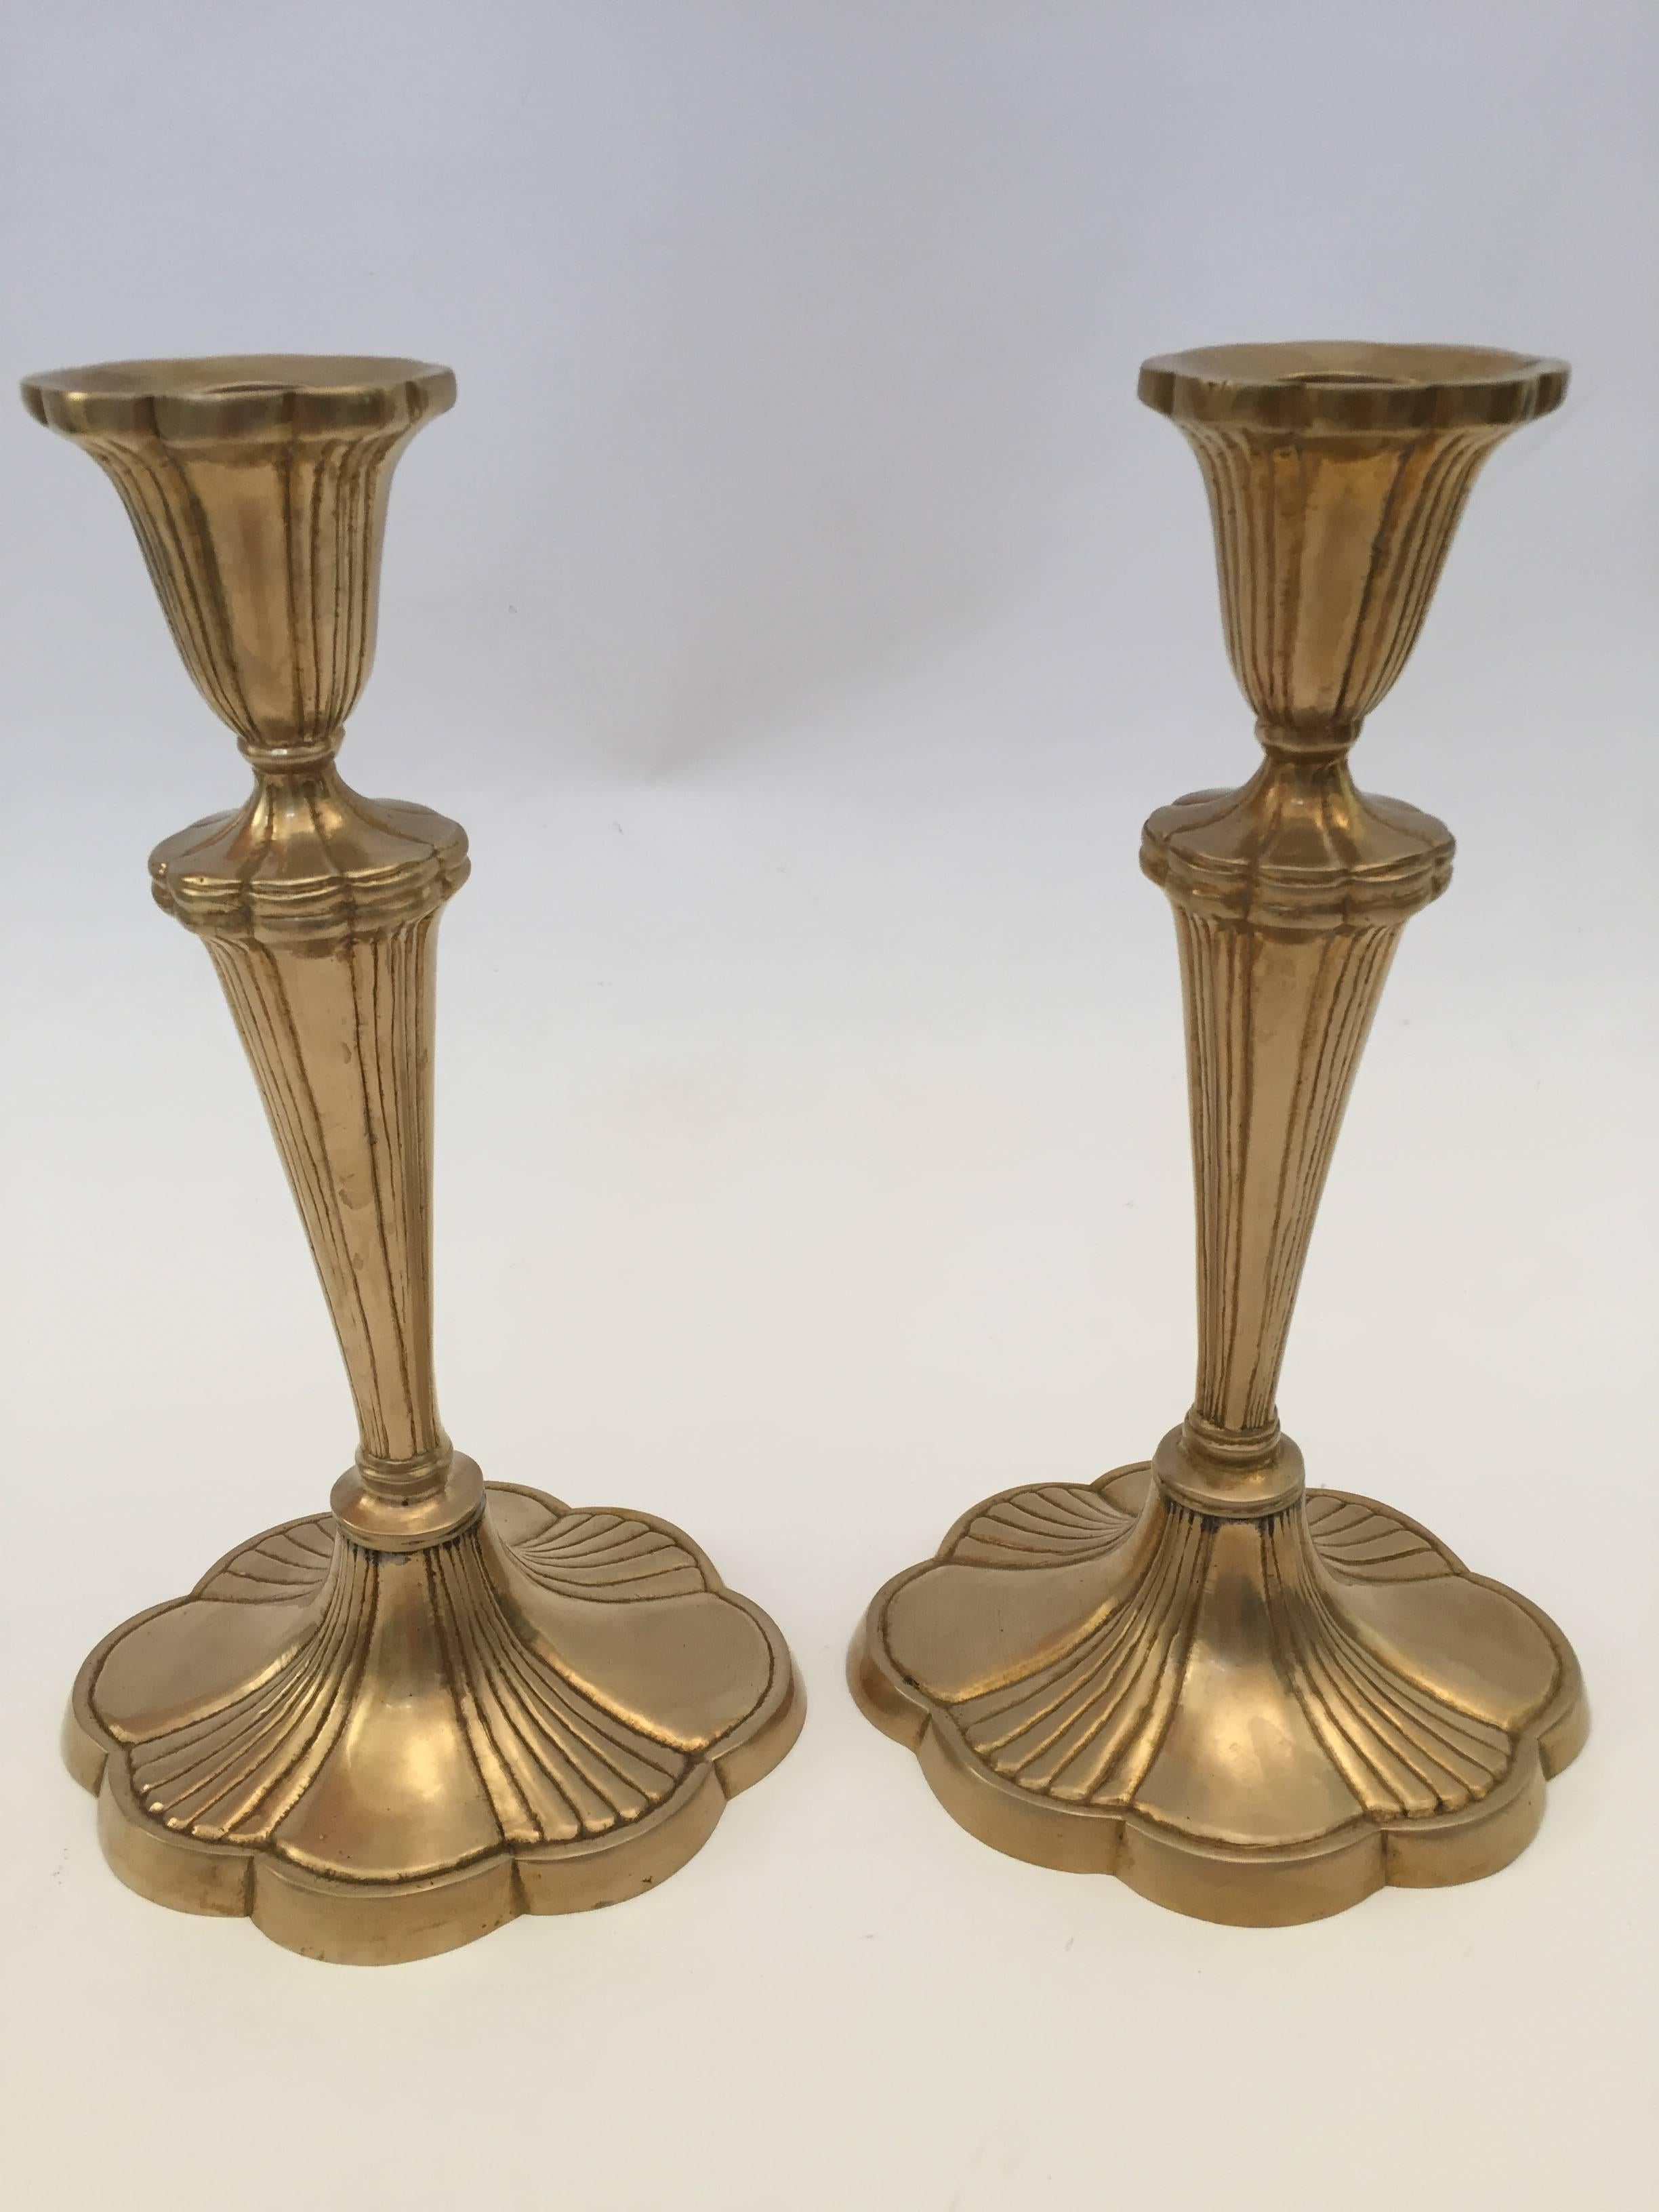 Great Art Nouveau French heavy brass pair of candlesticks
Size: 10.5